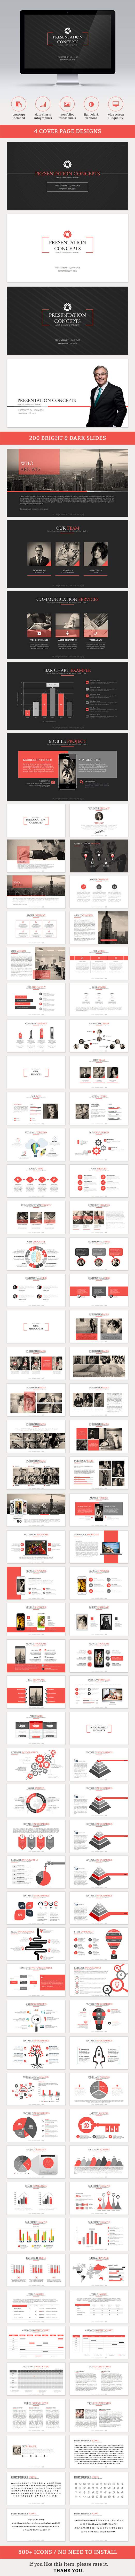 Axis Powerpoint Template